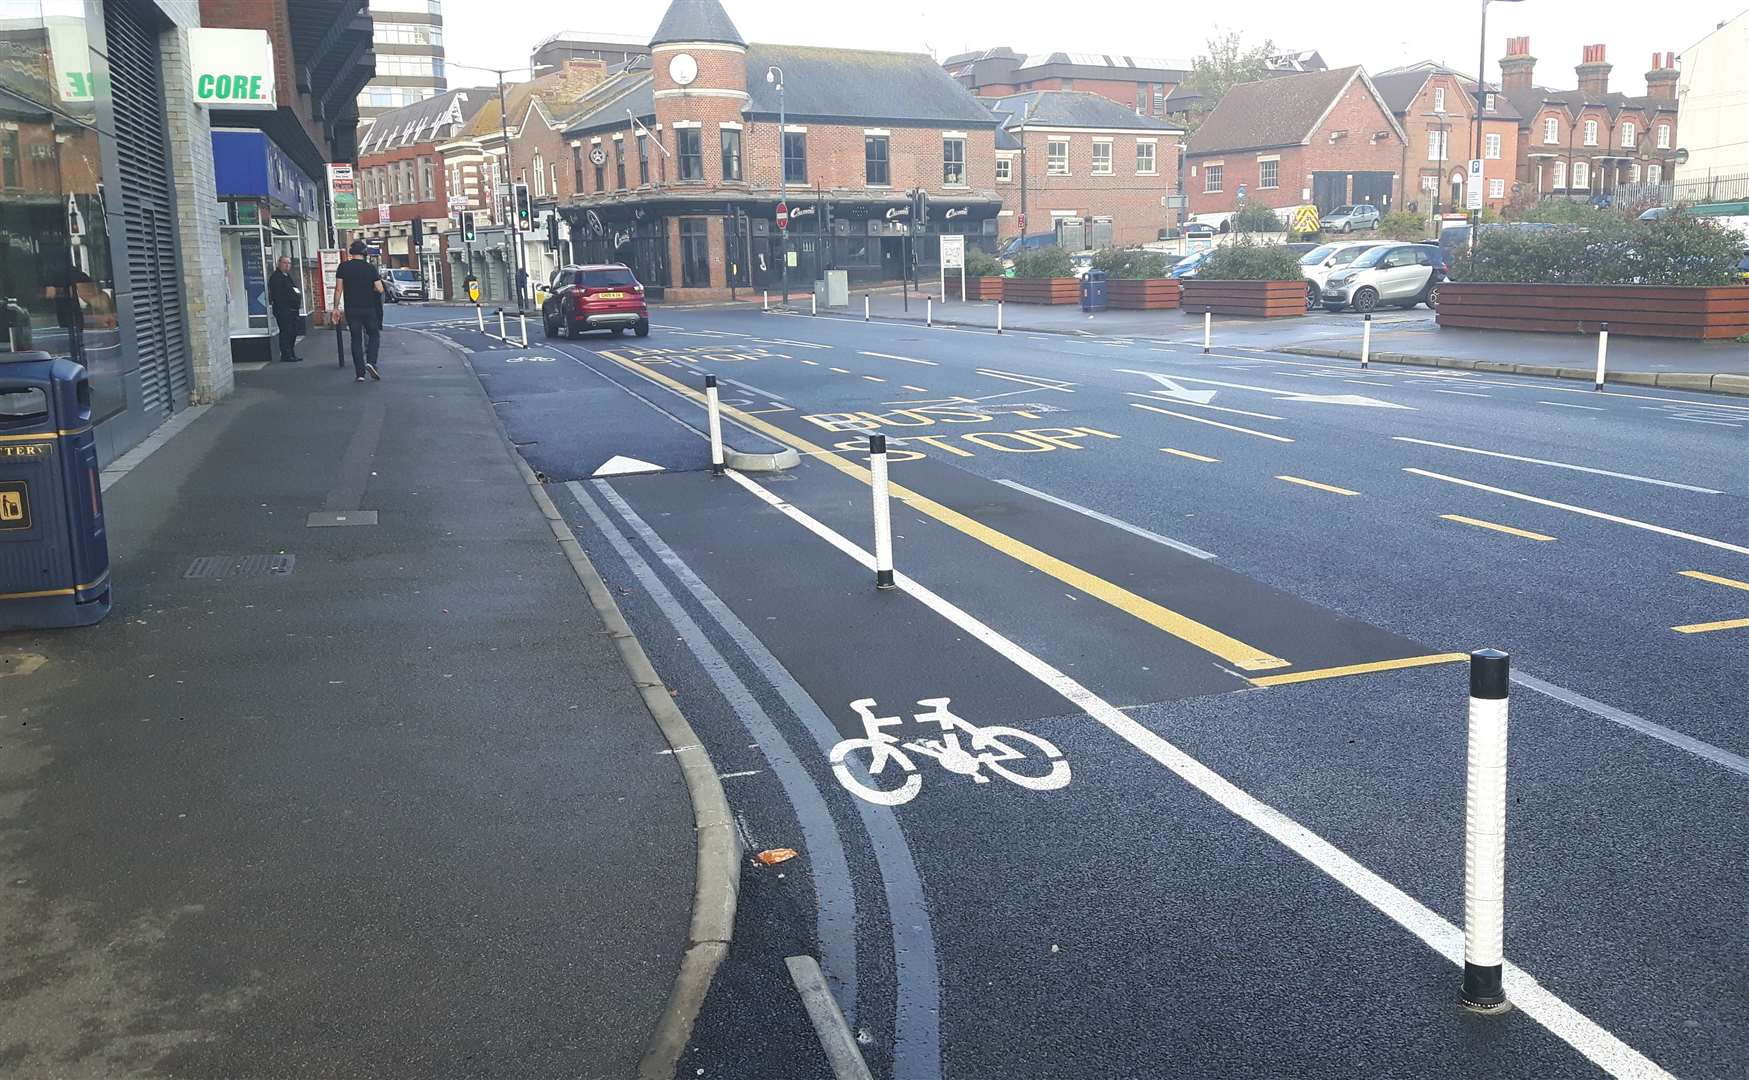 One of the "pop-up" cycle lanes in King Street, Maidstone